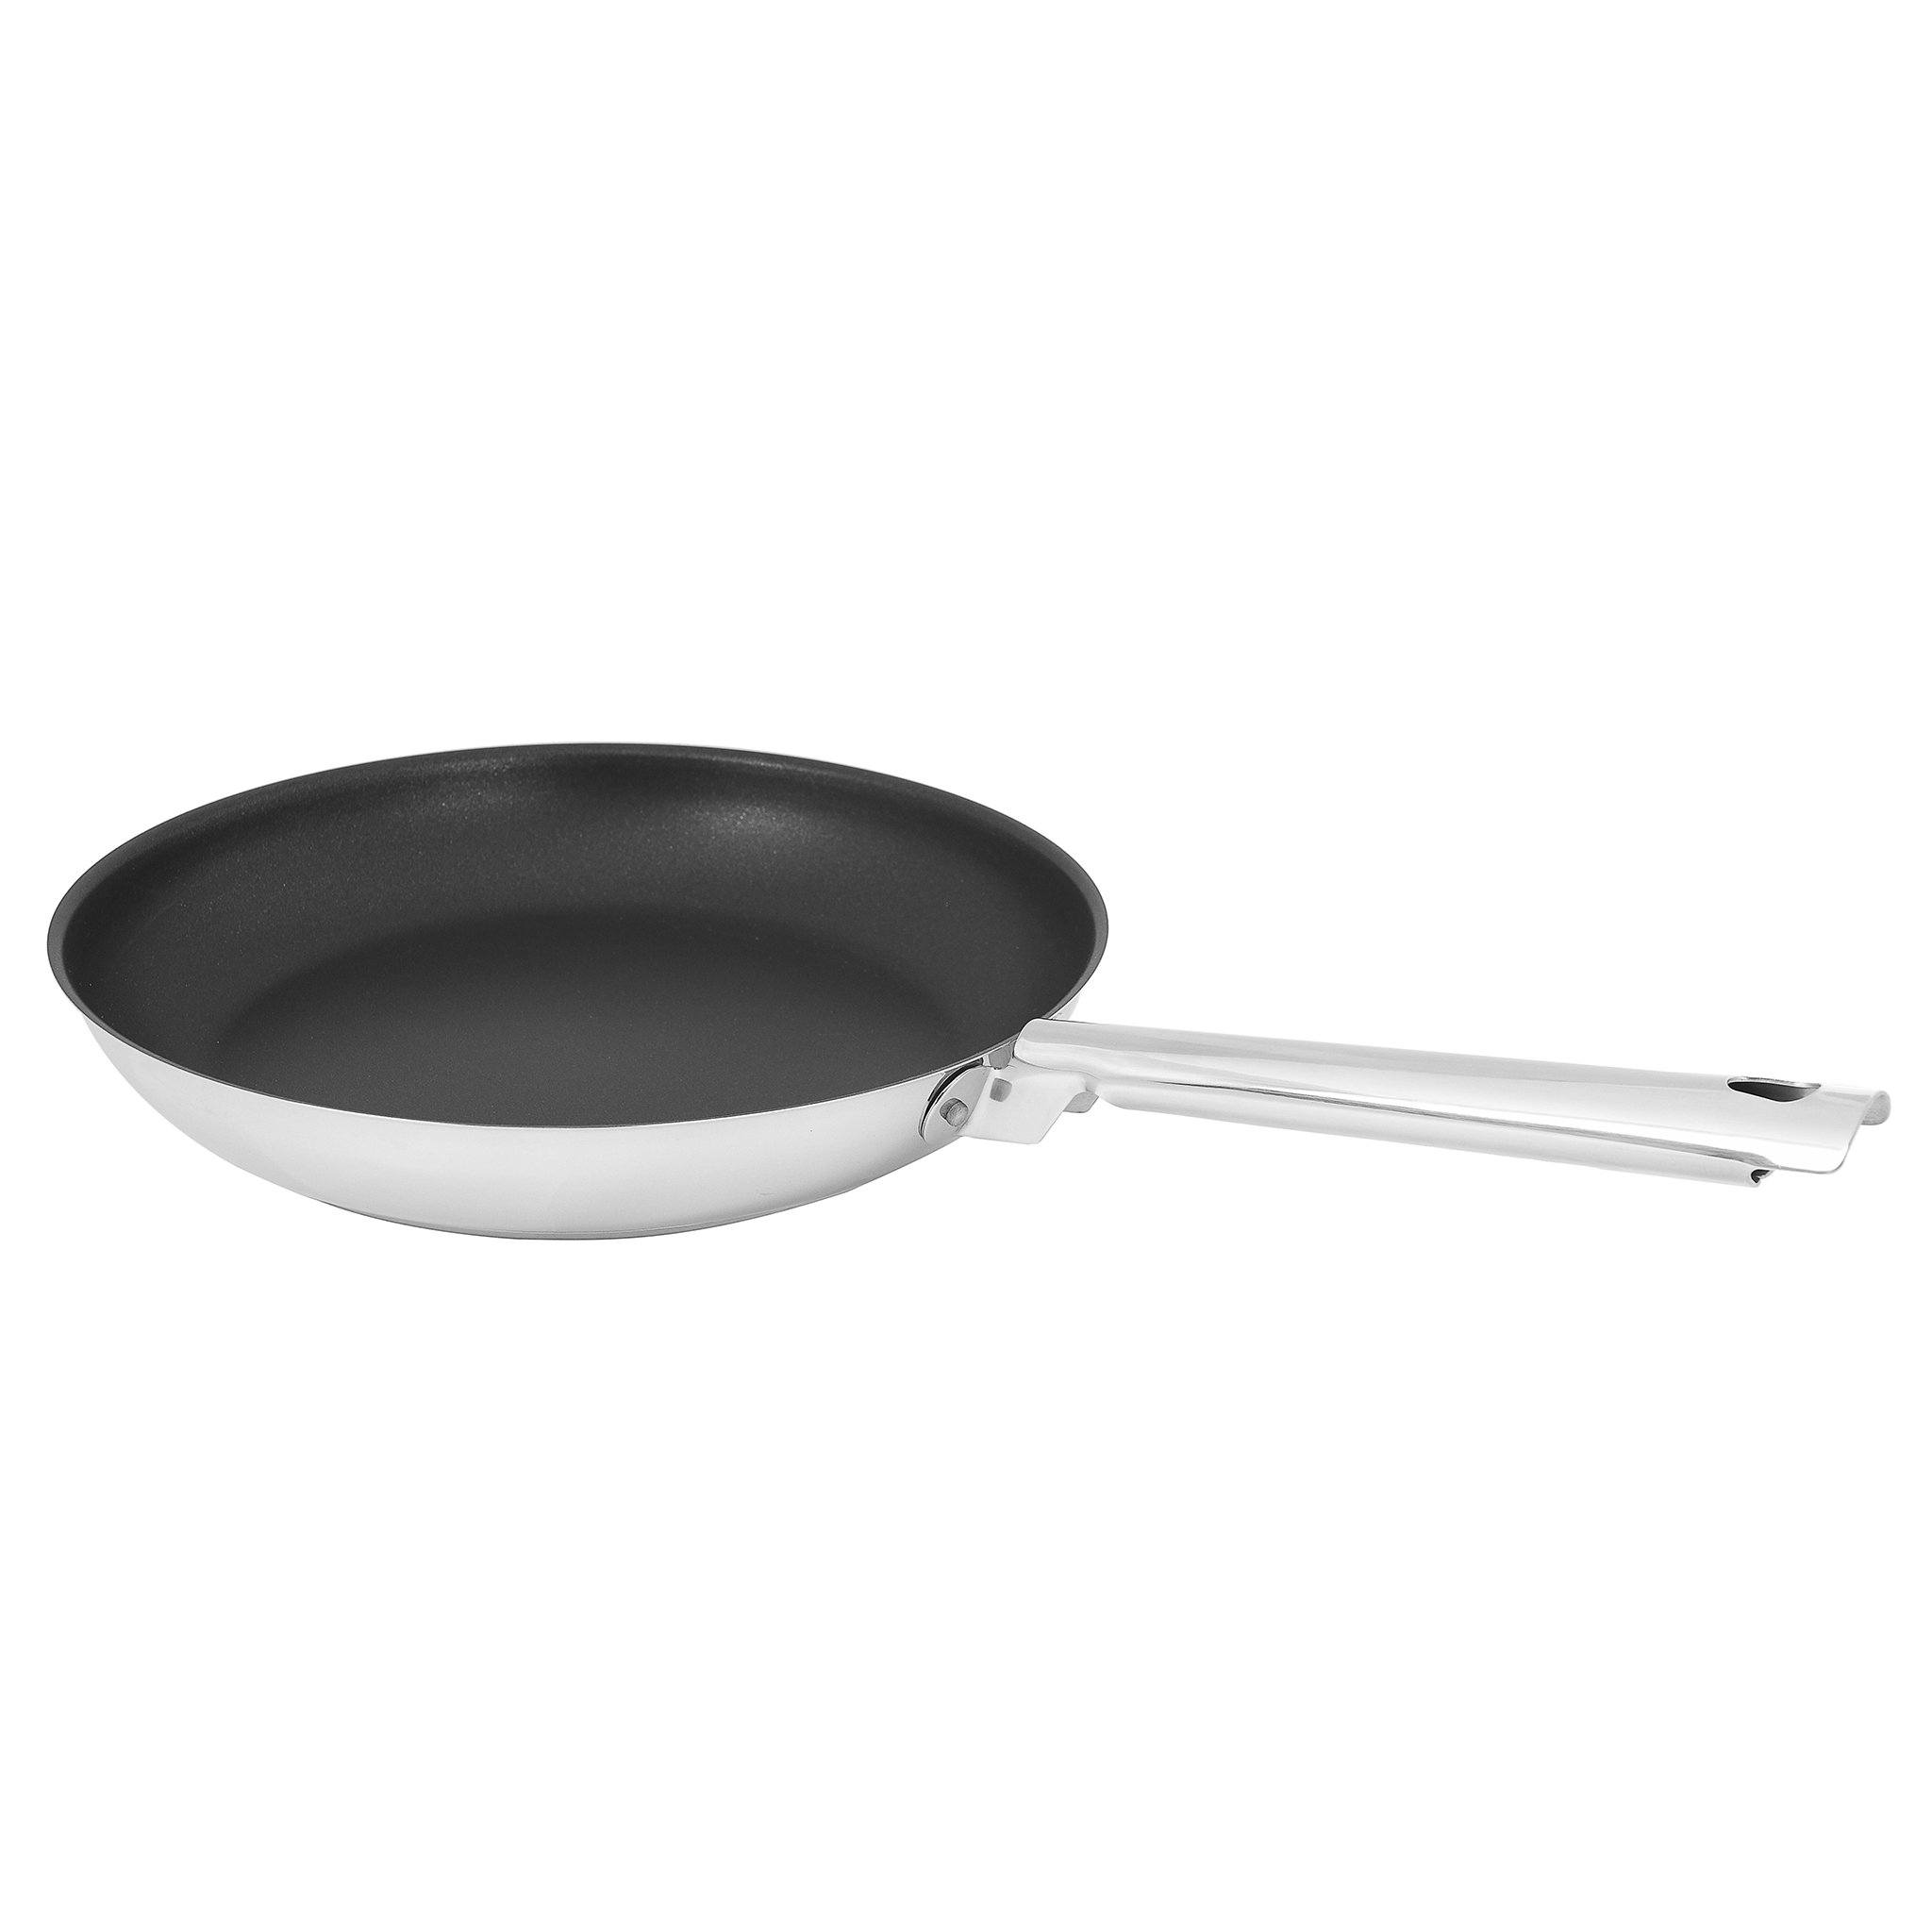 Silampos - Non Stick Frying Pan with Handle - Stainless Steel - 24cm - 440001650